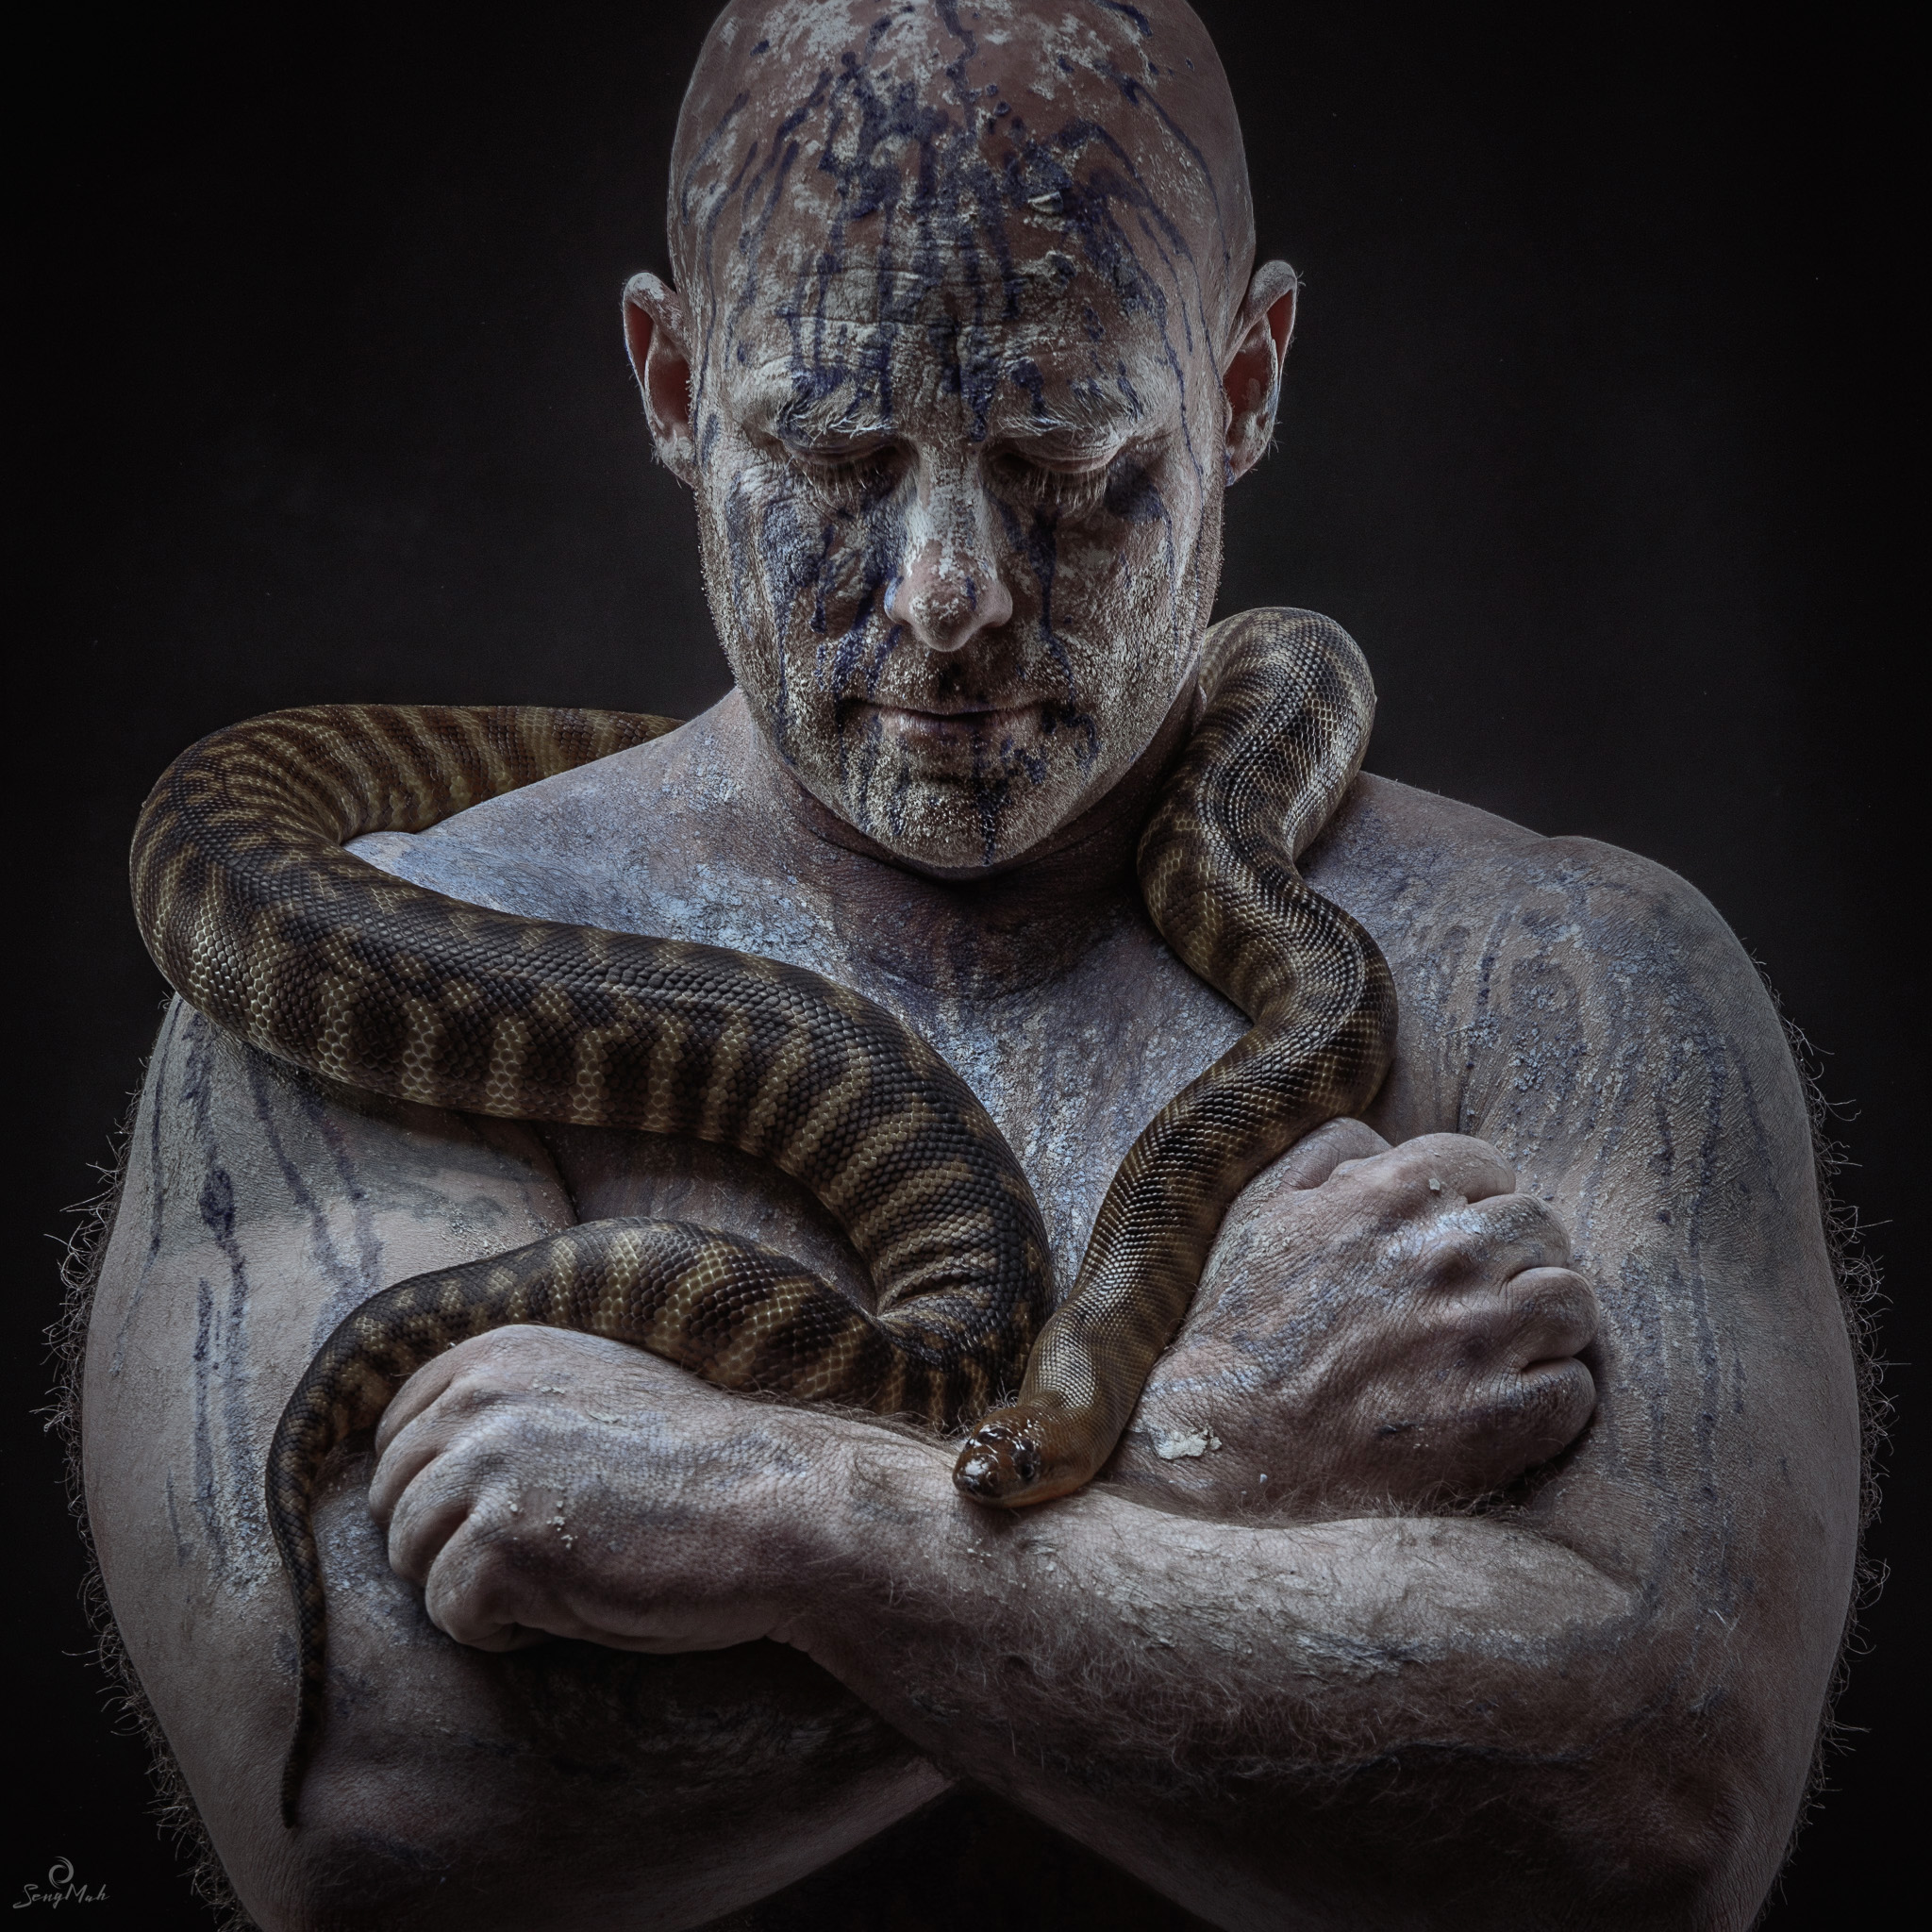 Clayed up man with snake